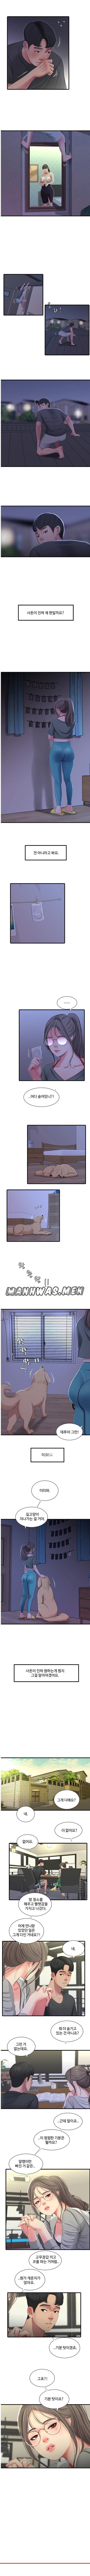 maidens-in-law-raw-chap-35-2